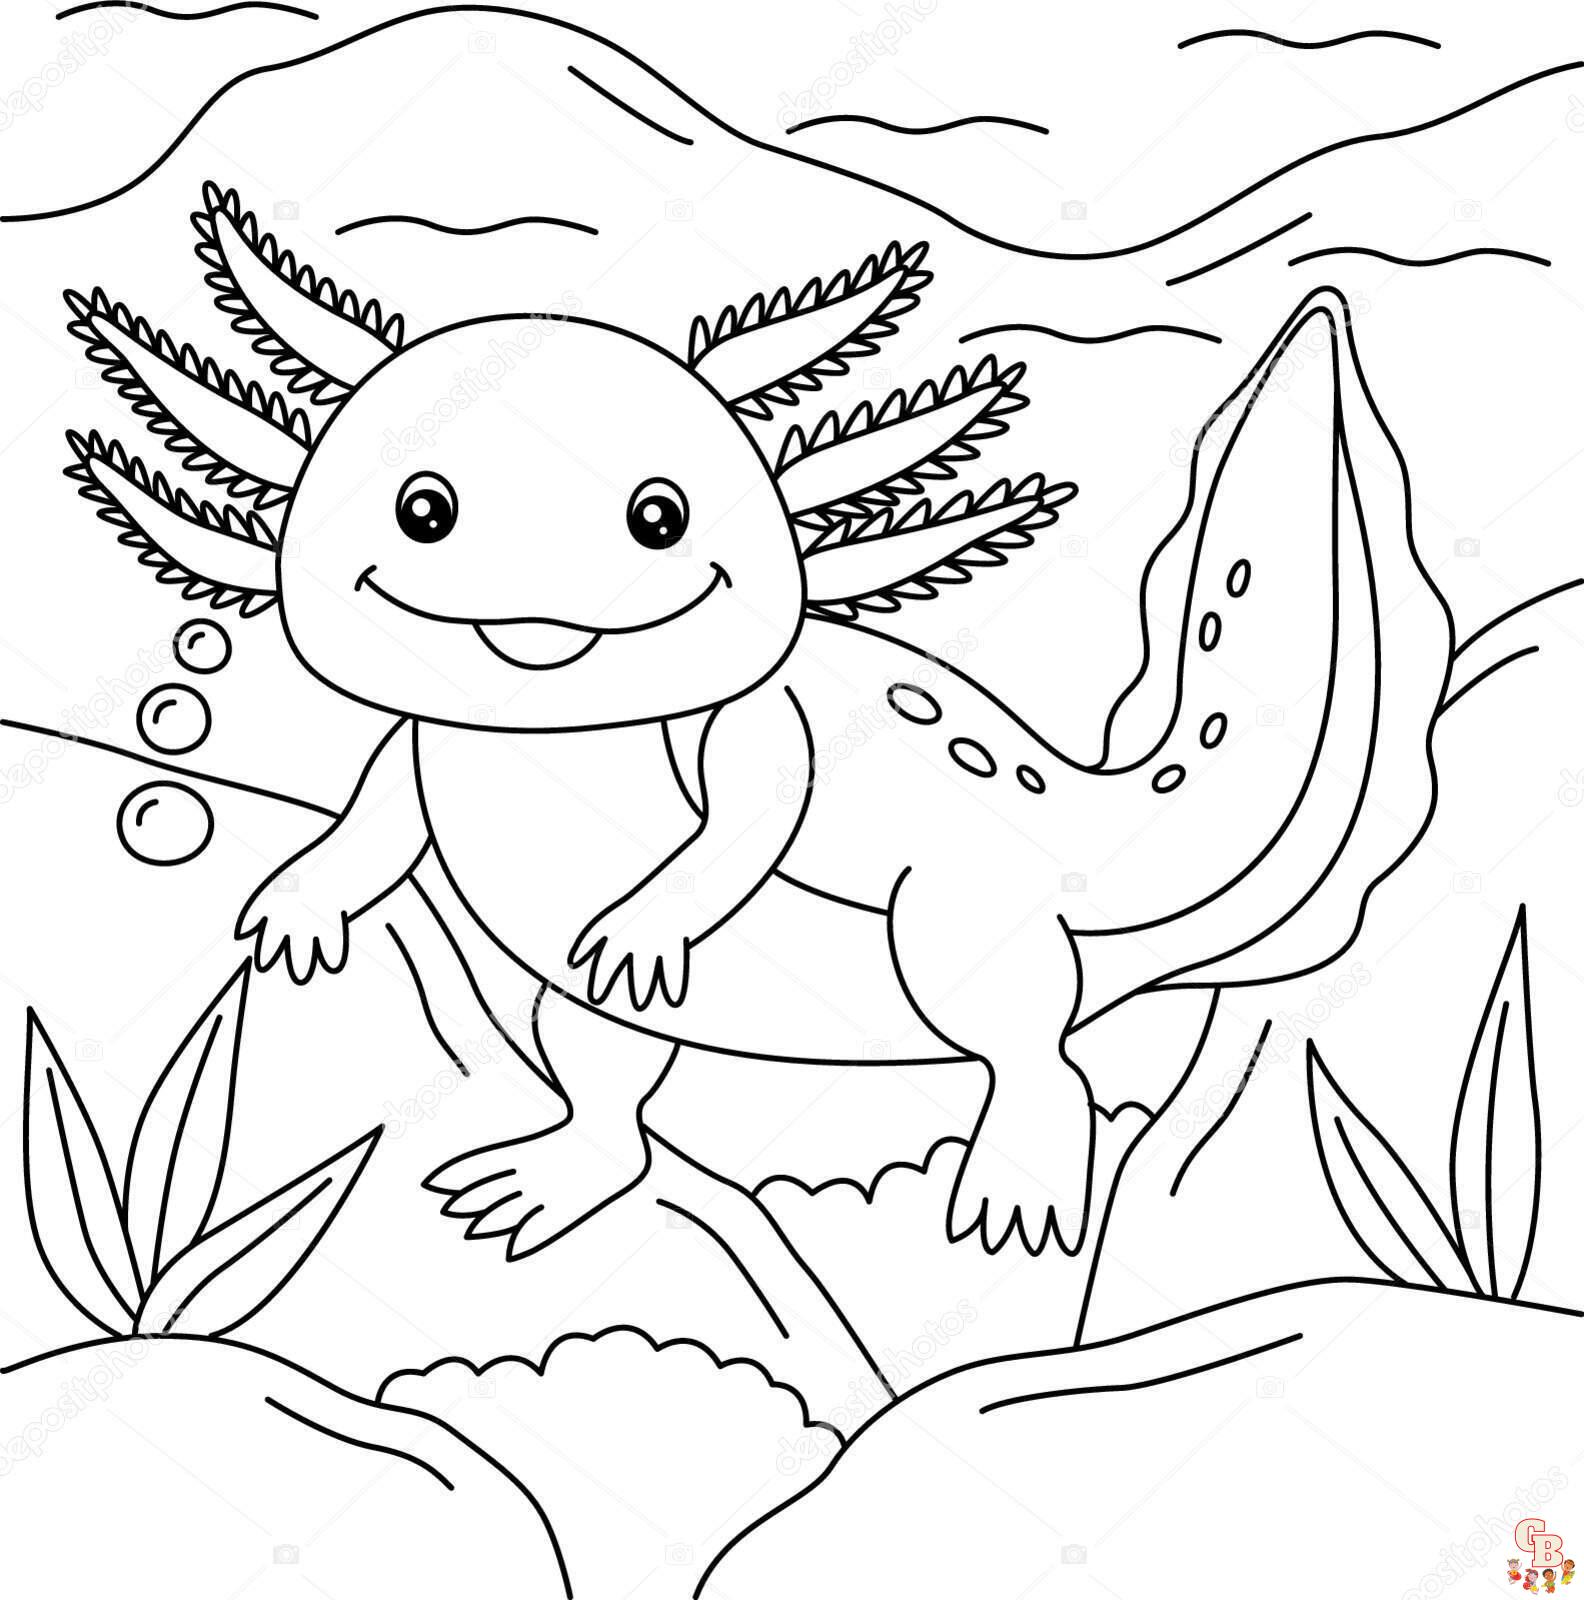 21+ Axolotl Coloring Pages Free